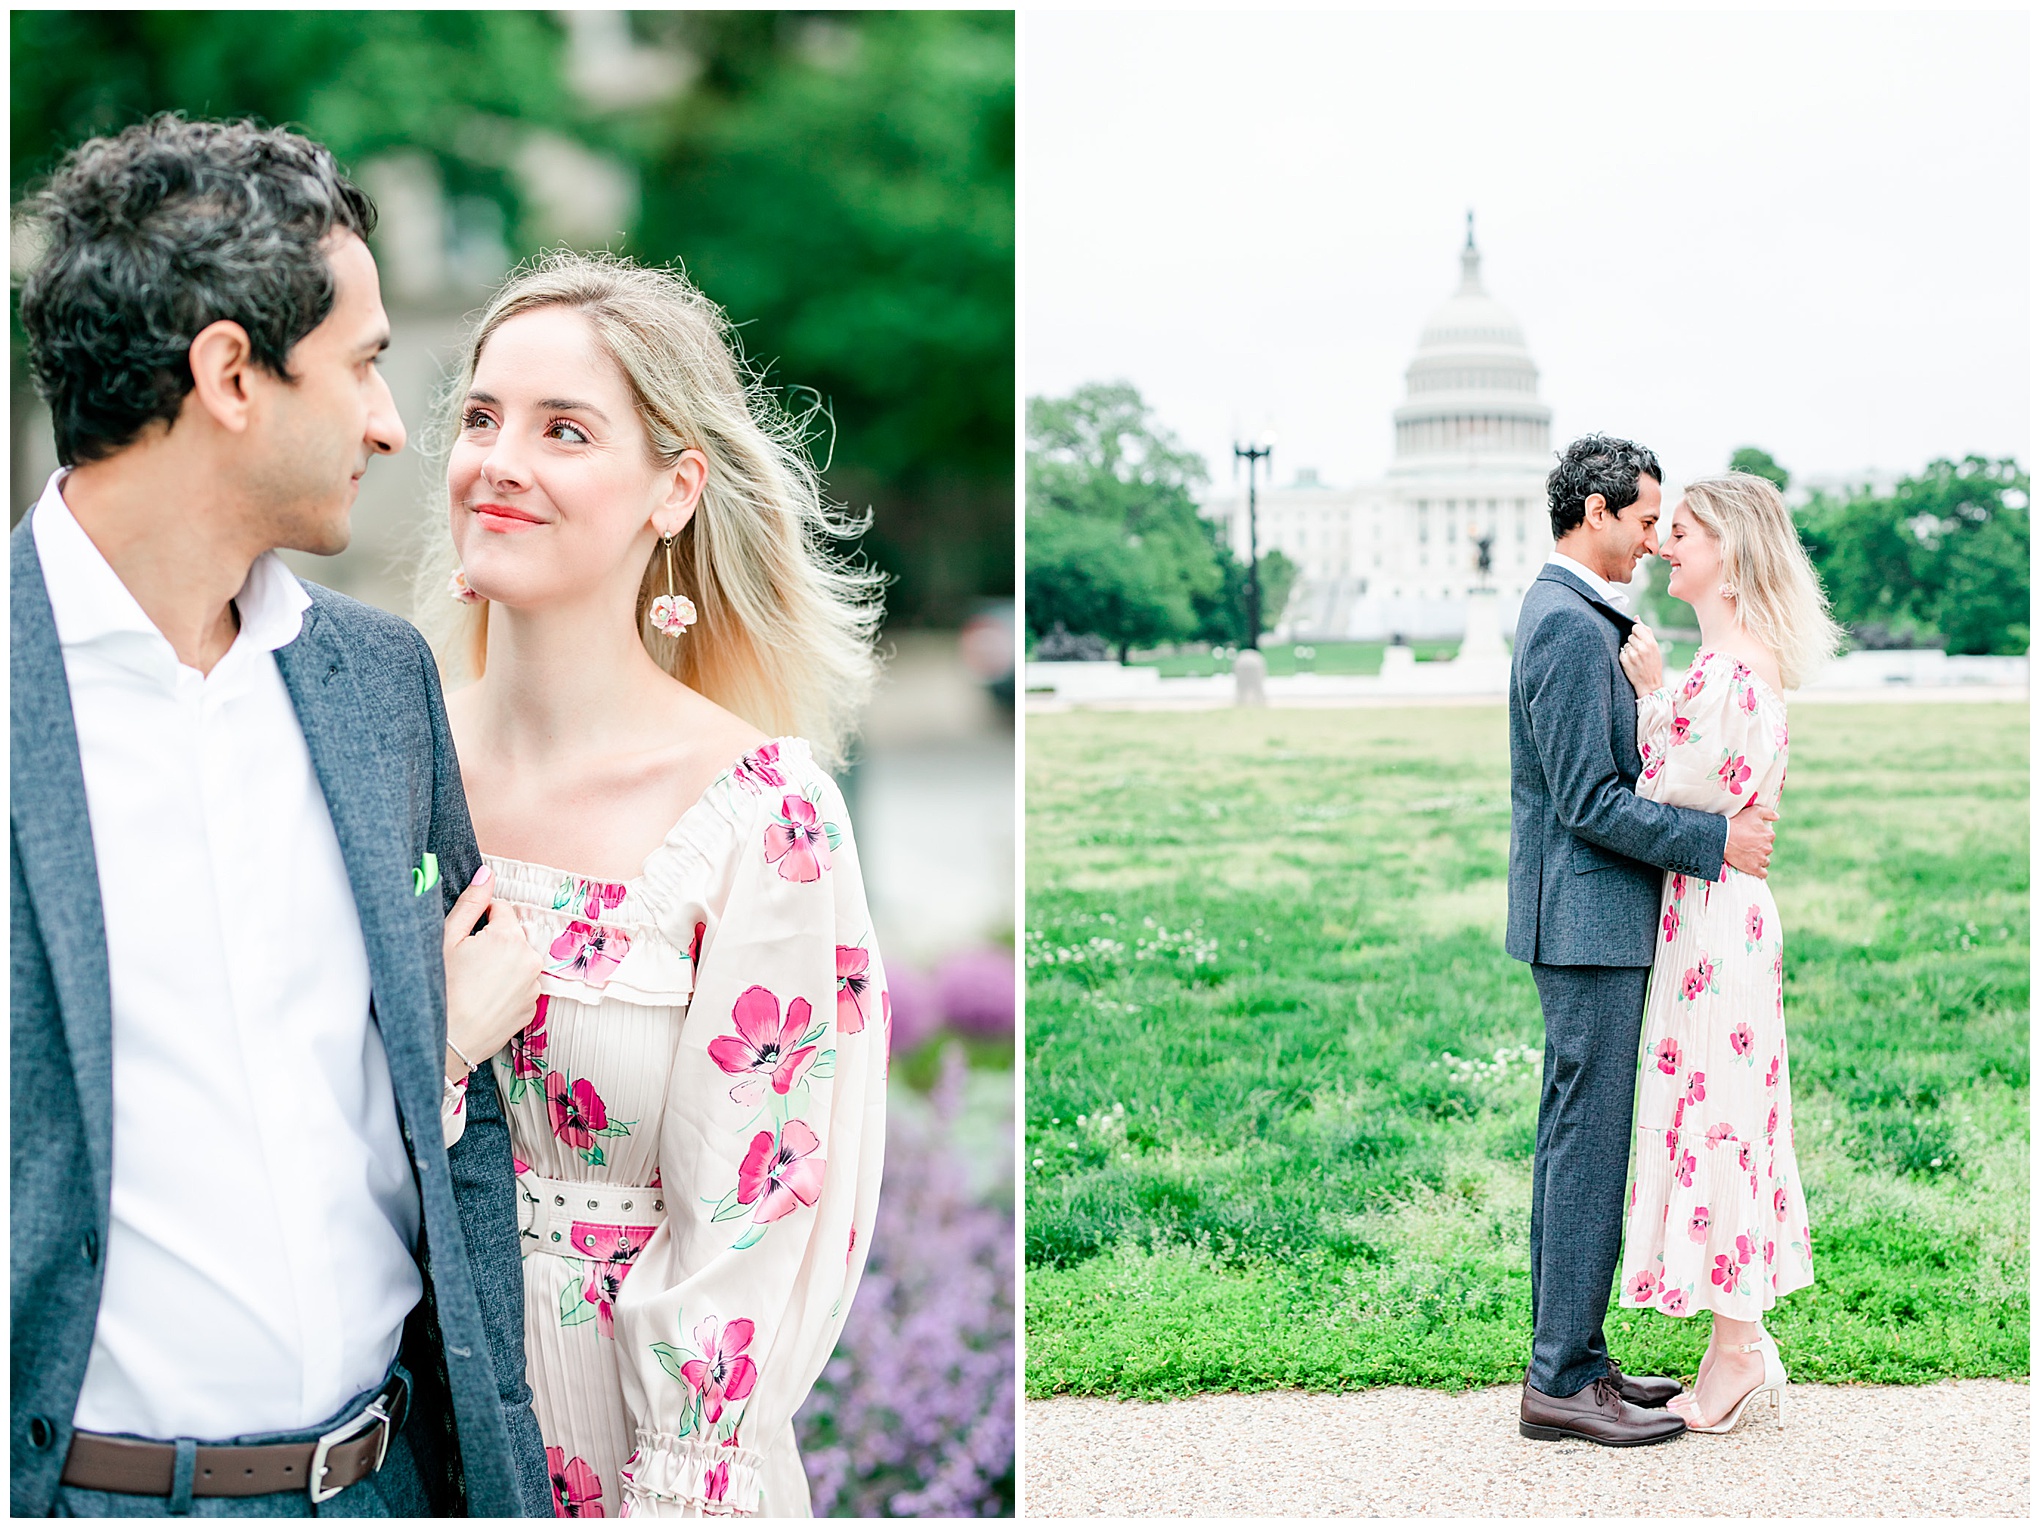 spring Capitol Hill engagement photos, Capitol Hill DC, DC Capitol Hill, DC engagement photos, DC engagement photographer, Capitol Hill photographer, Capitol Hill engagement photographer, Virginia engagement photographer, Rachel E.H. Photography, romantic portraits, spring portraits, spring engagement photos, National Mall engagement photos, floral print dress, engagement photos outfits, statement earrings, romantic couple